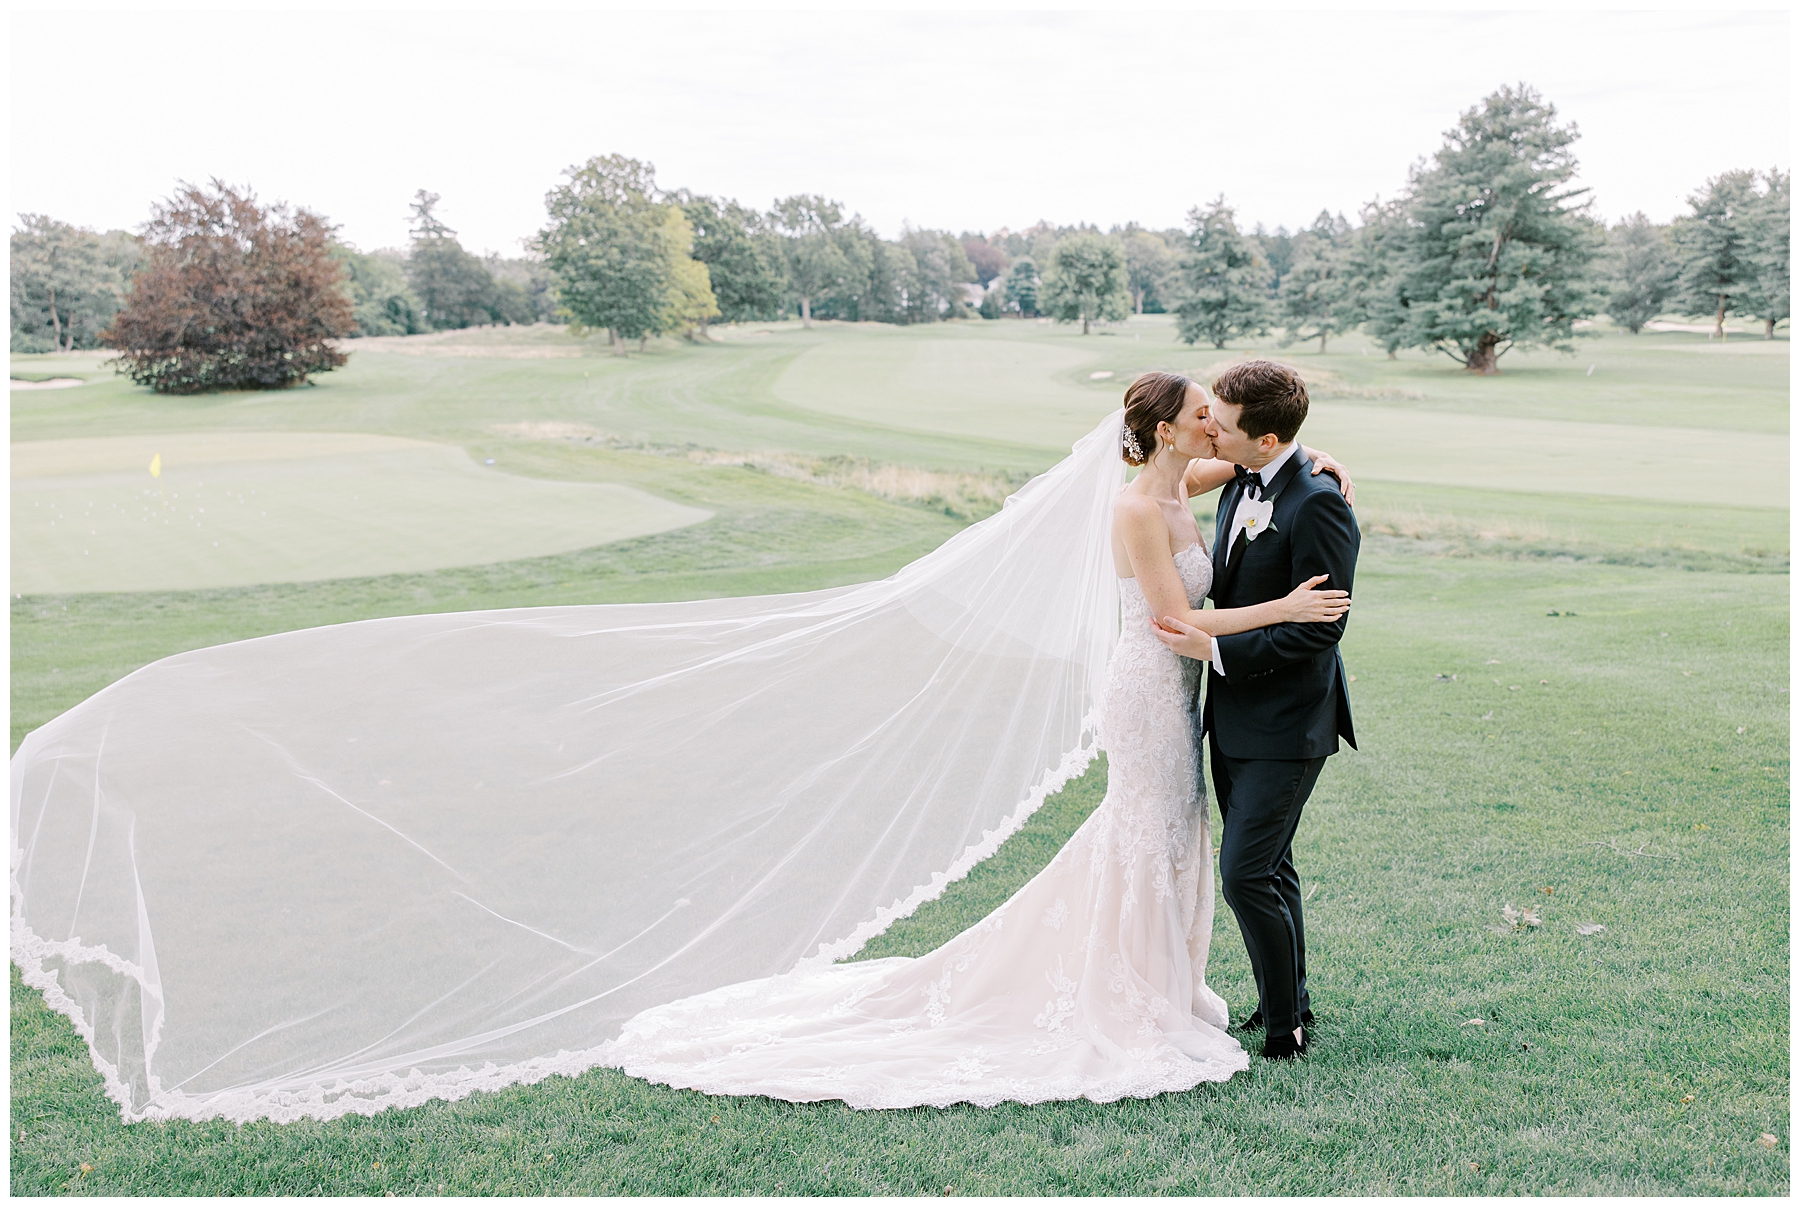 timeless wedding portraits from wedding at The Country Club in Brookline, MA